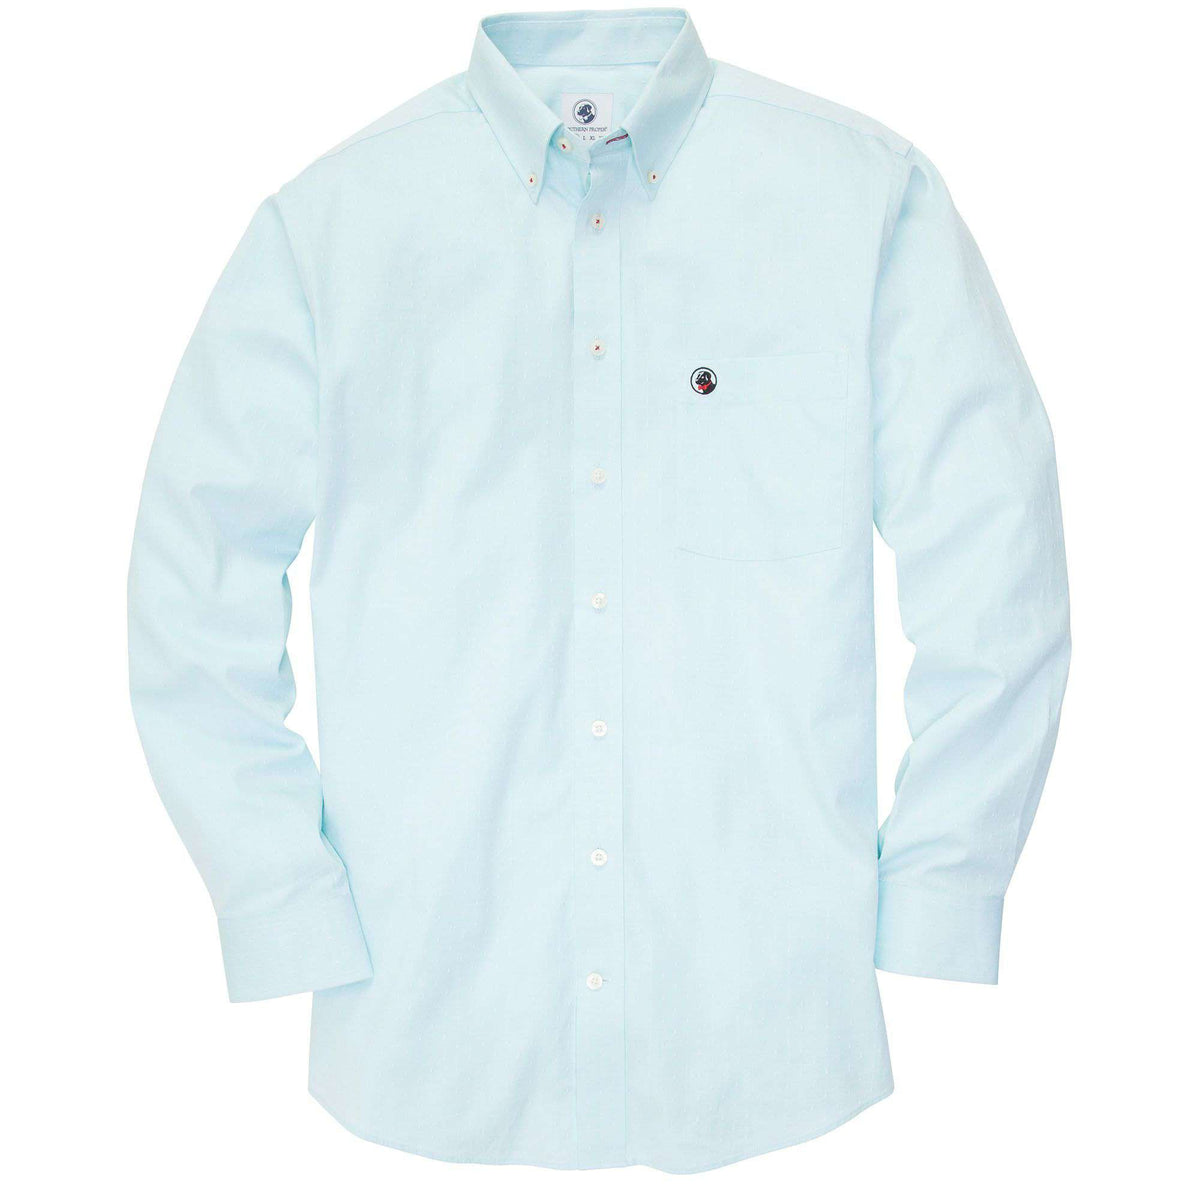 Weekend Shirt in Hushed Green by Southern Proper - Country Club Prep